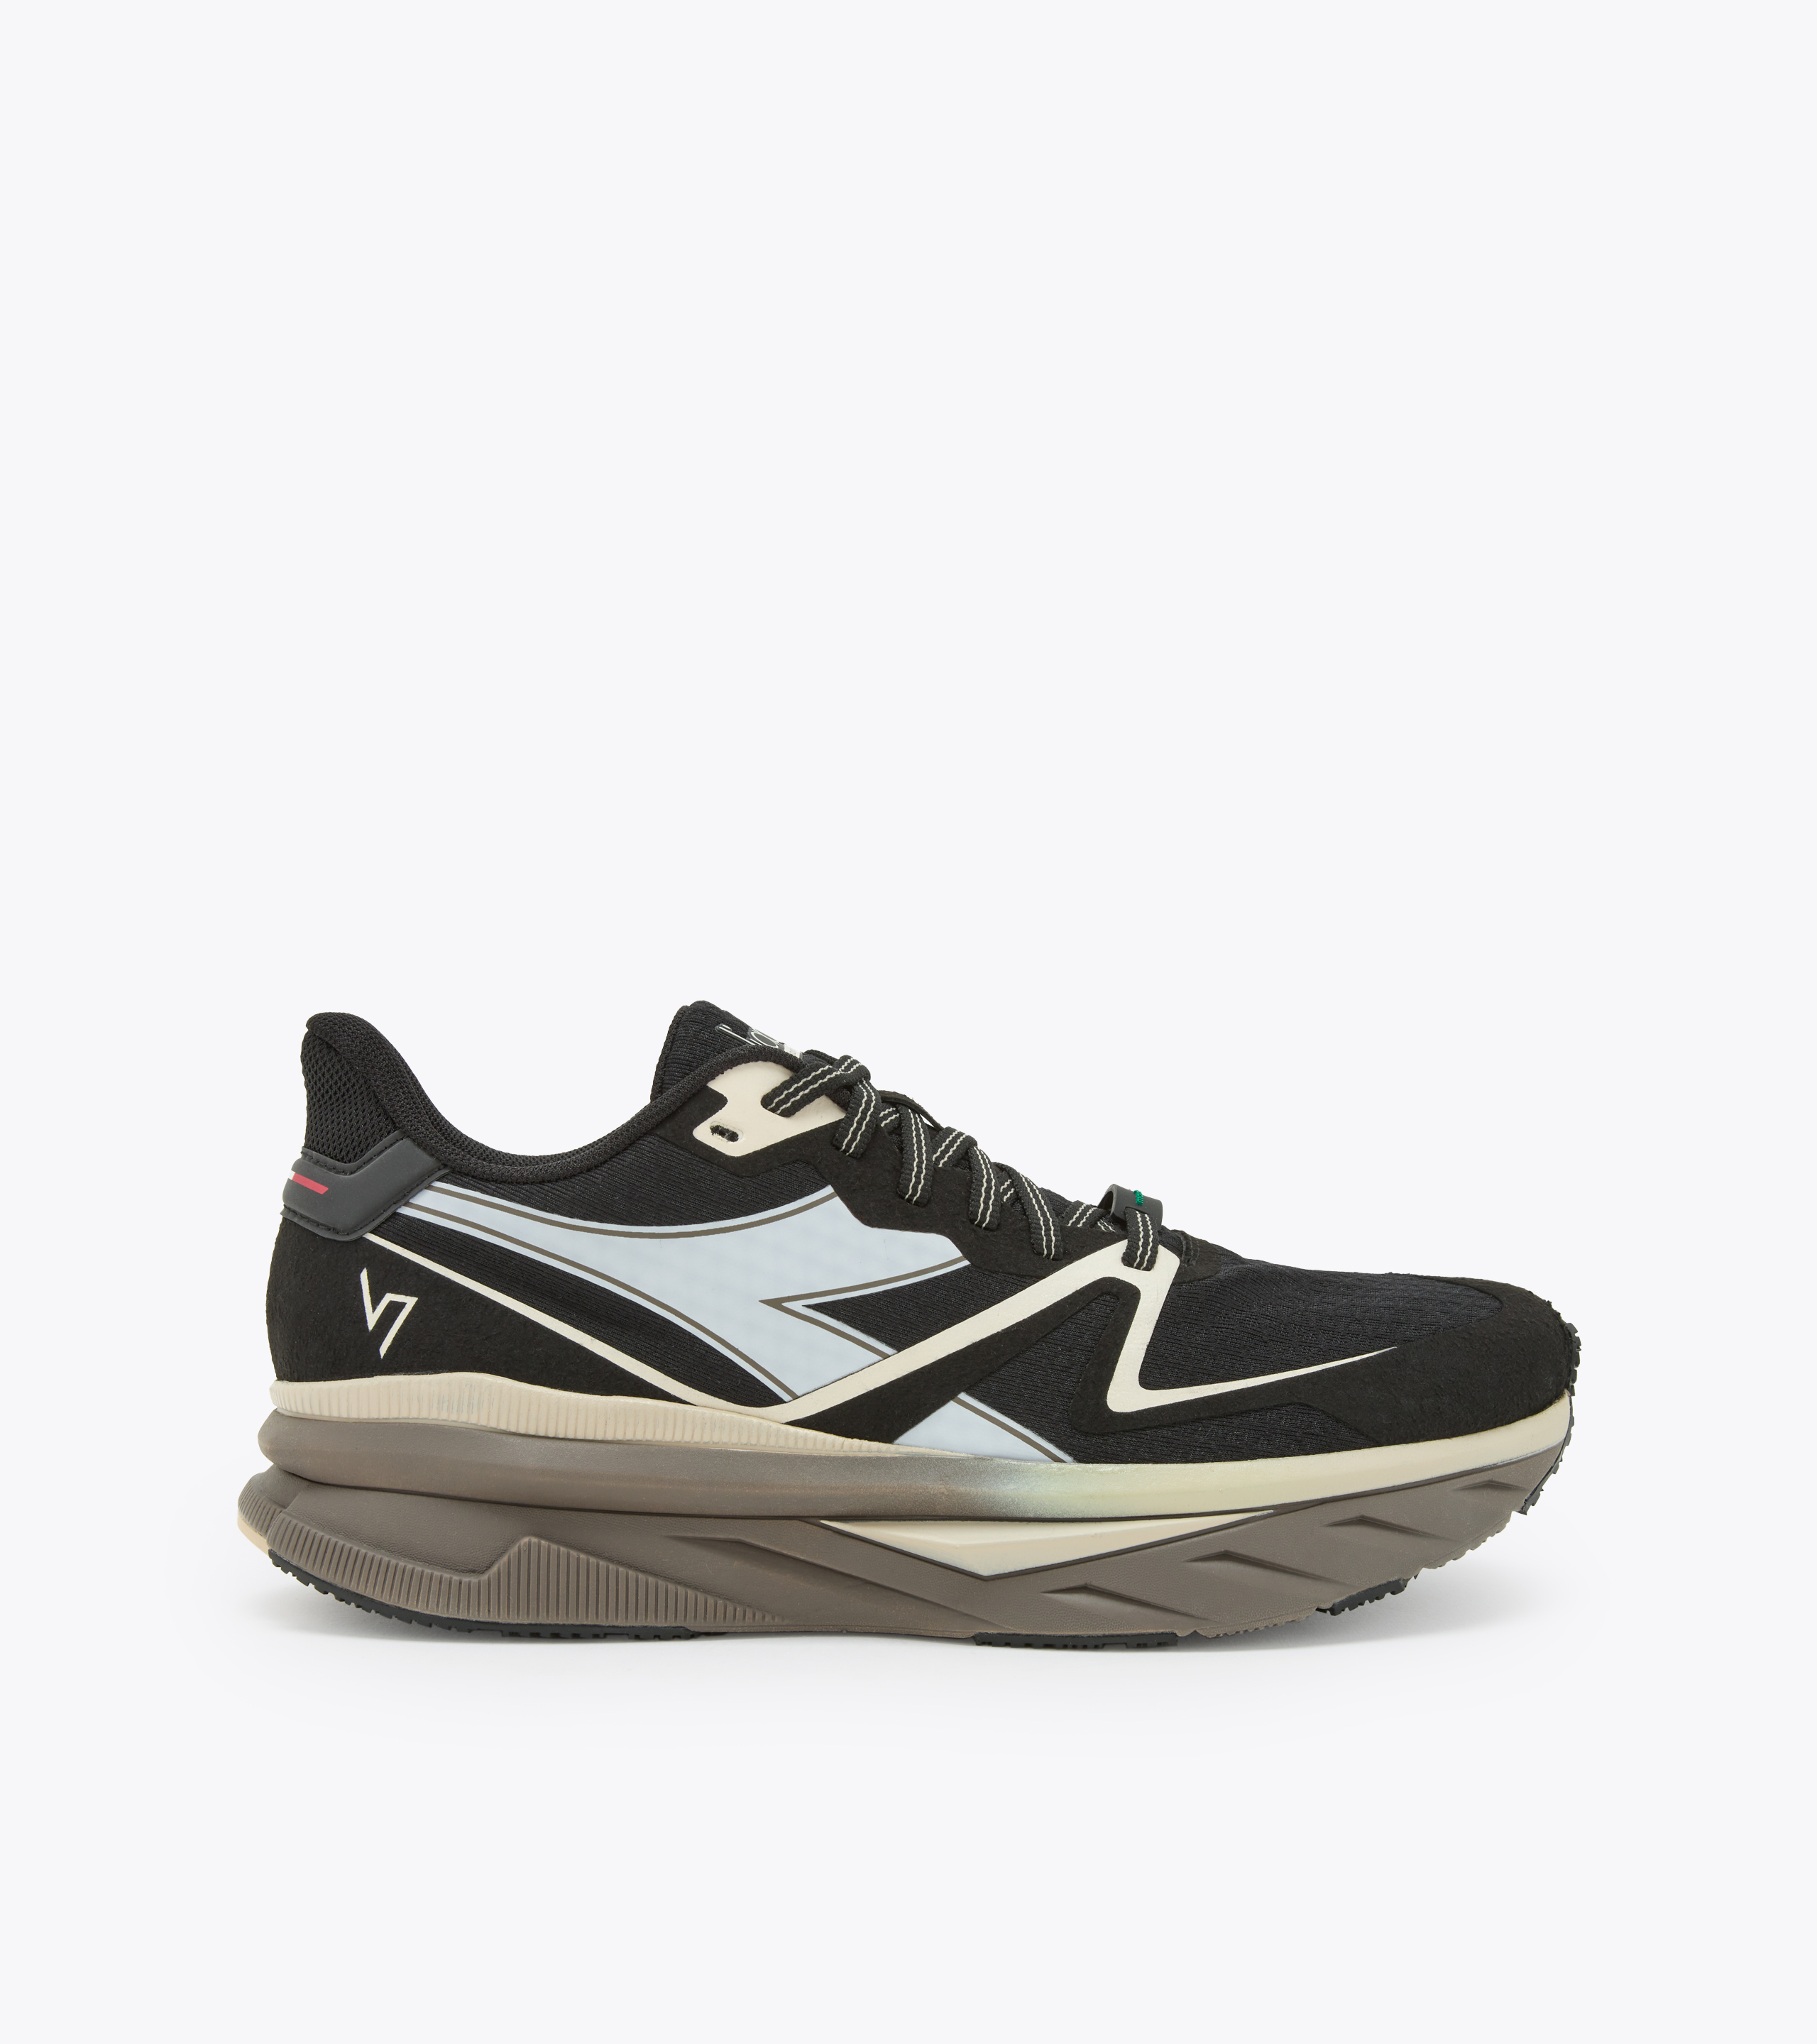 ATOMO V7000 Made in Italy Running shoes - Unisex - Diadora Online Store US